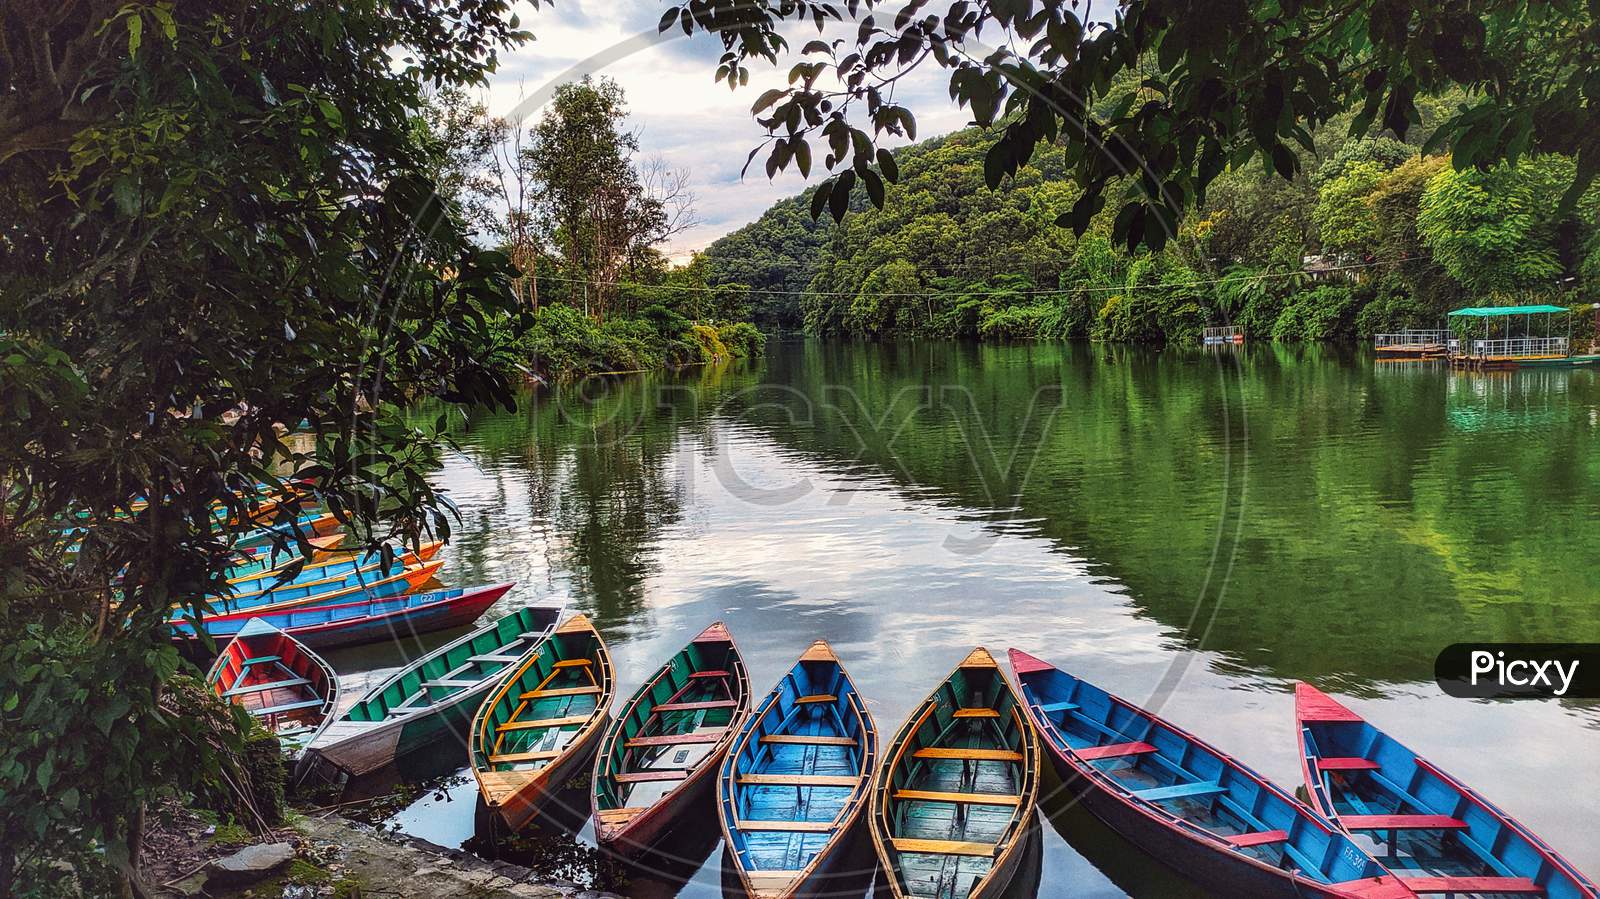 This photo is about a lake with boats resting in the water peacefully.